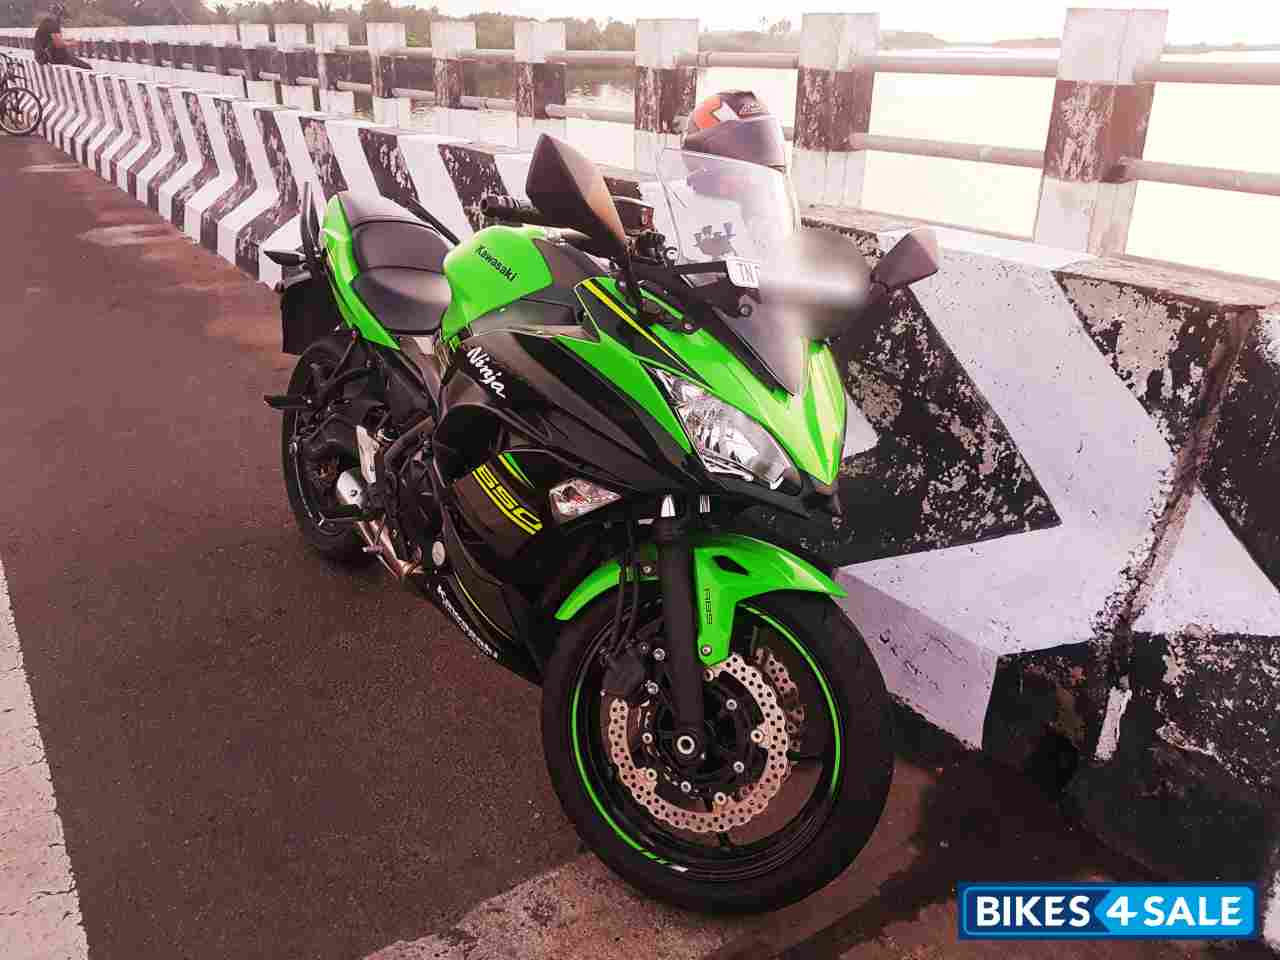 Why Would You What To Buy A Used Adv Now New Kid On The Block Suzuki S V Strom 650 Xt Asks This Question Wh Kids On The Block New Kids On The